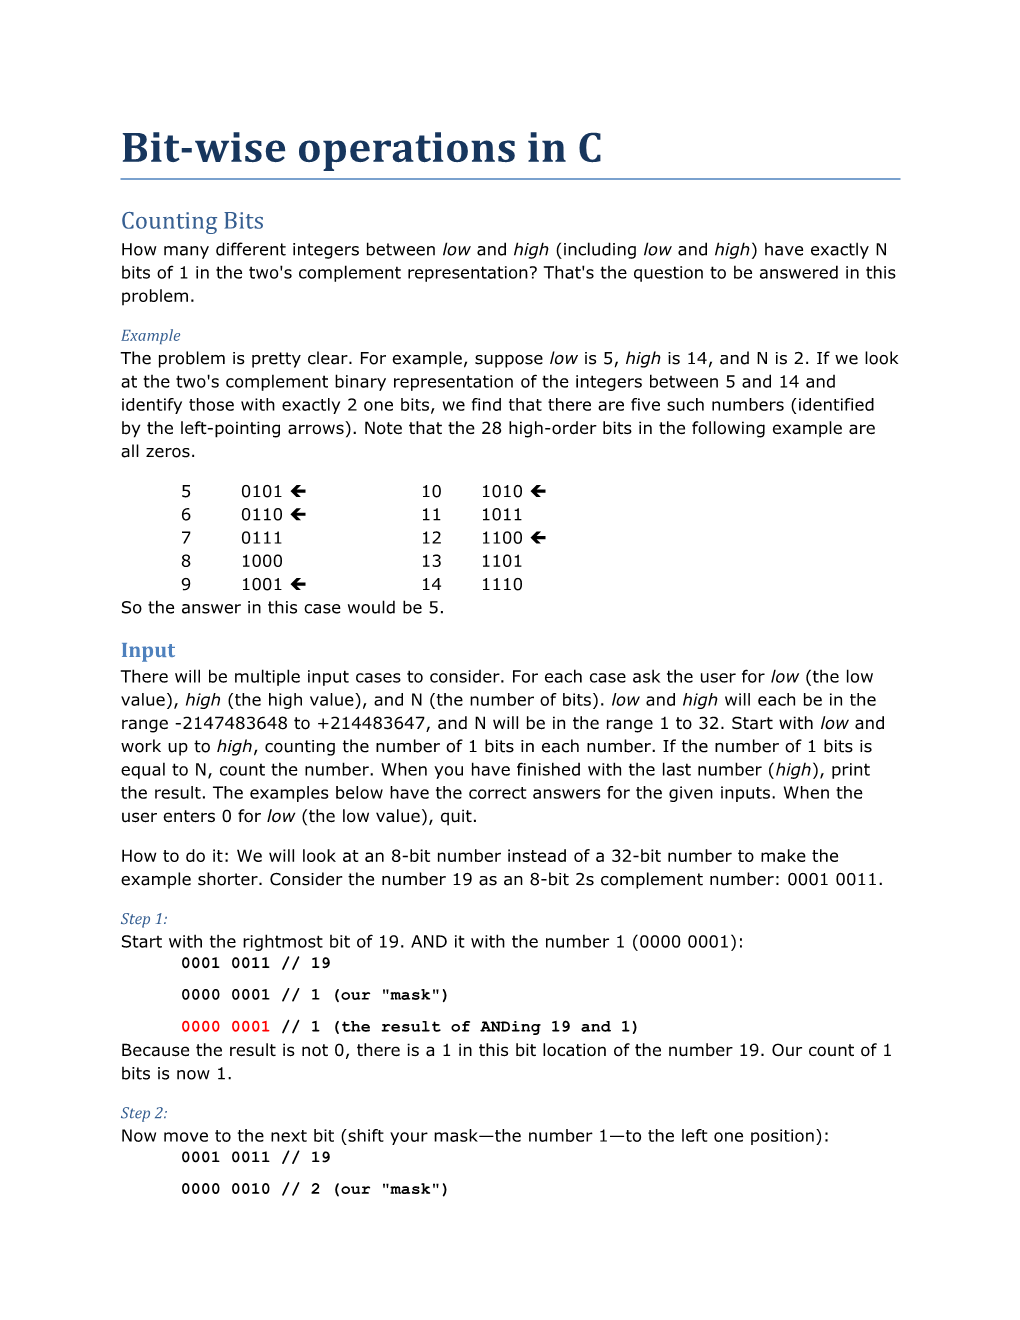 Bit-Wise Operations in C